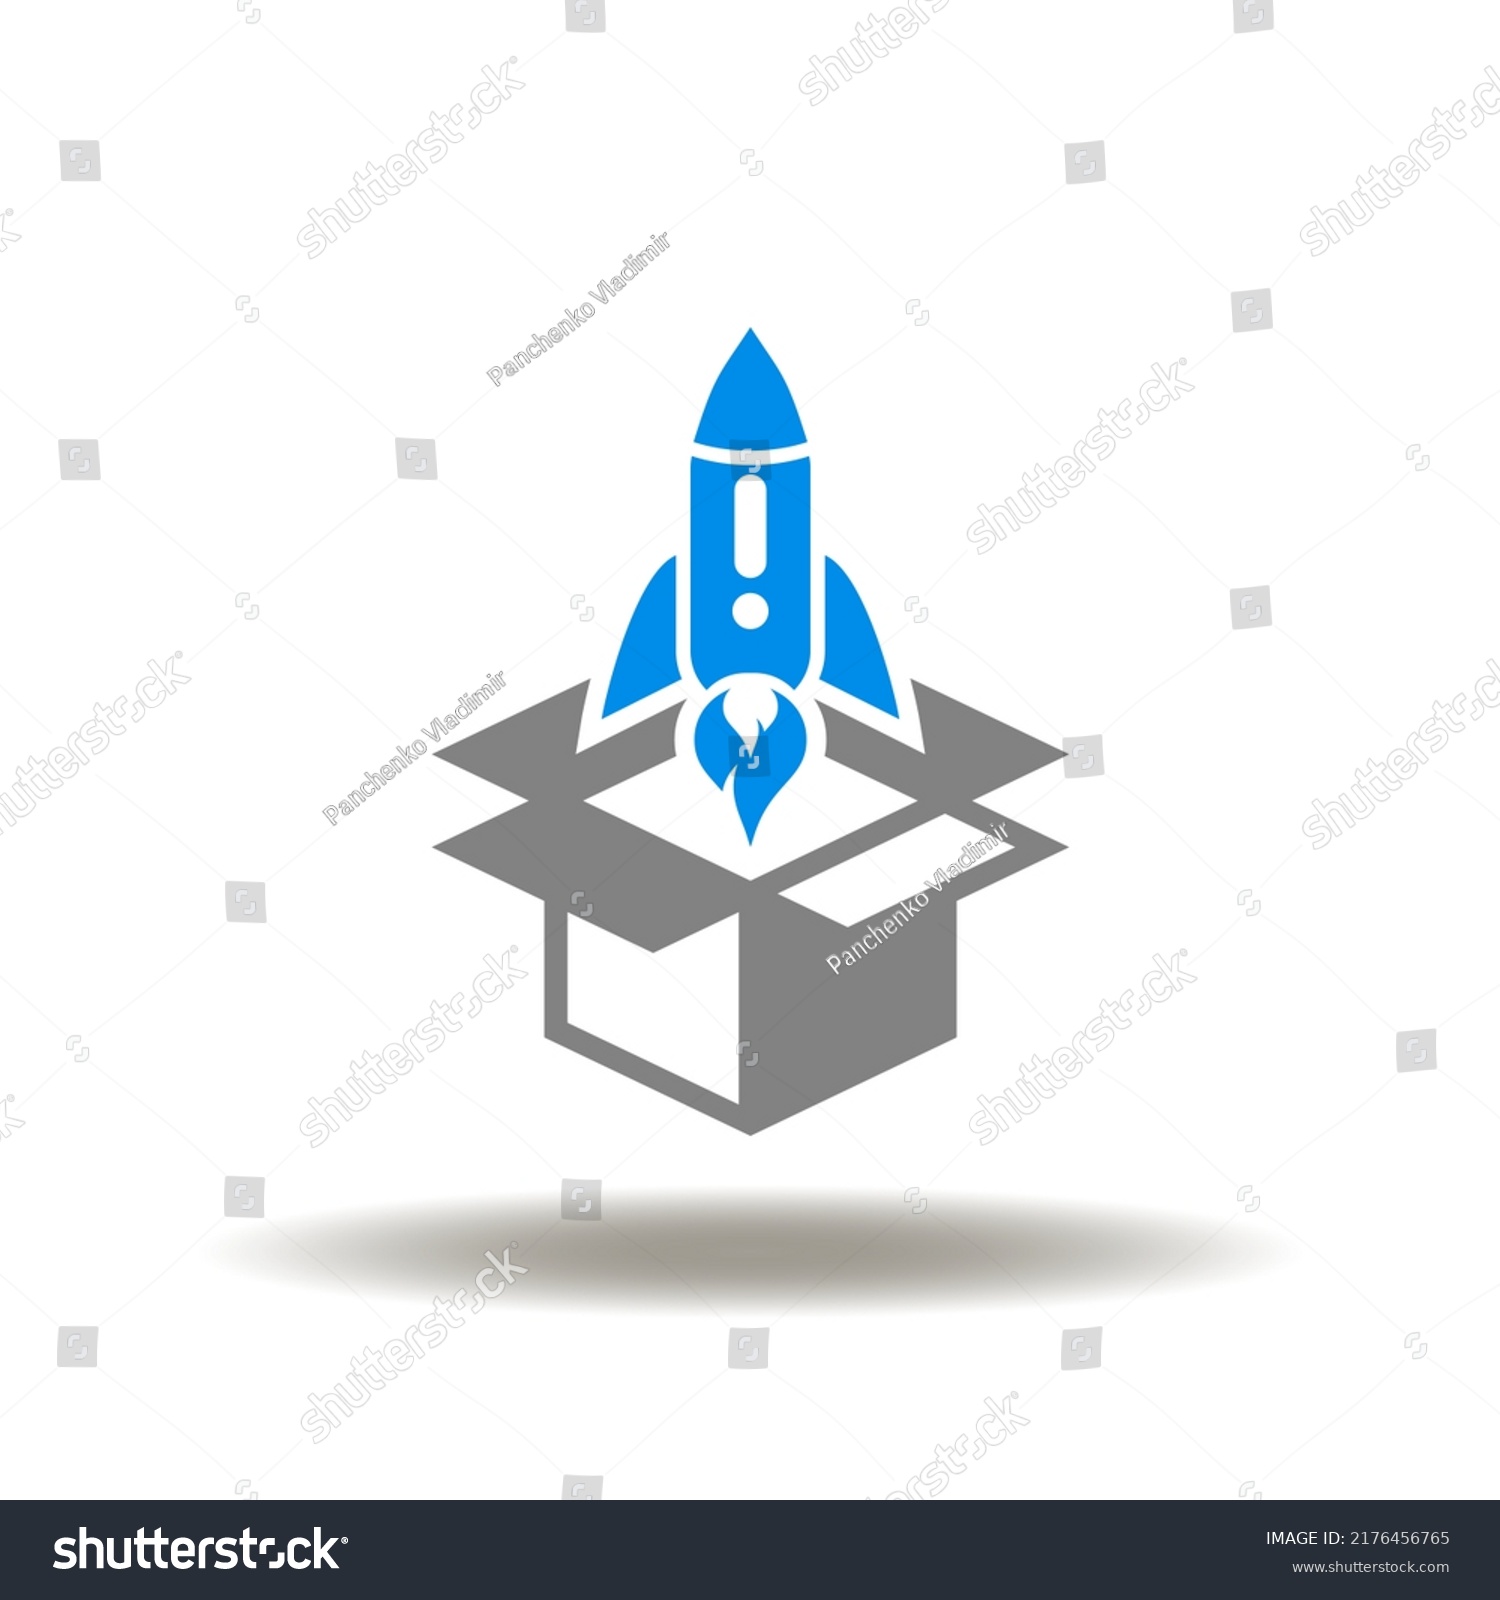 Vector illustration of open cardboard or packaging with start rocket. Icon of startup. Symbol of MVP Minimum Viable Product. #2176456765